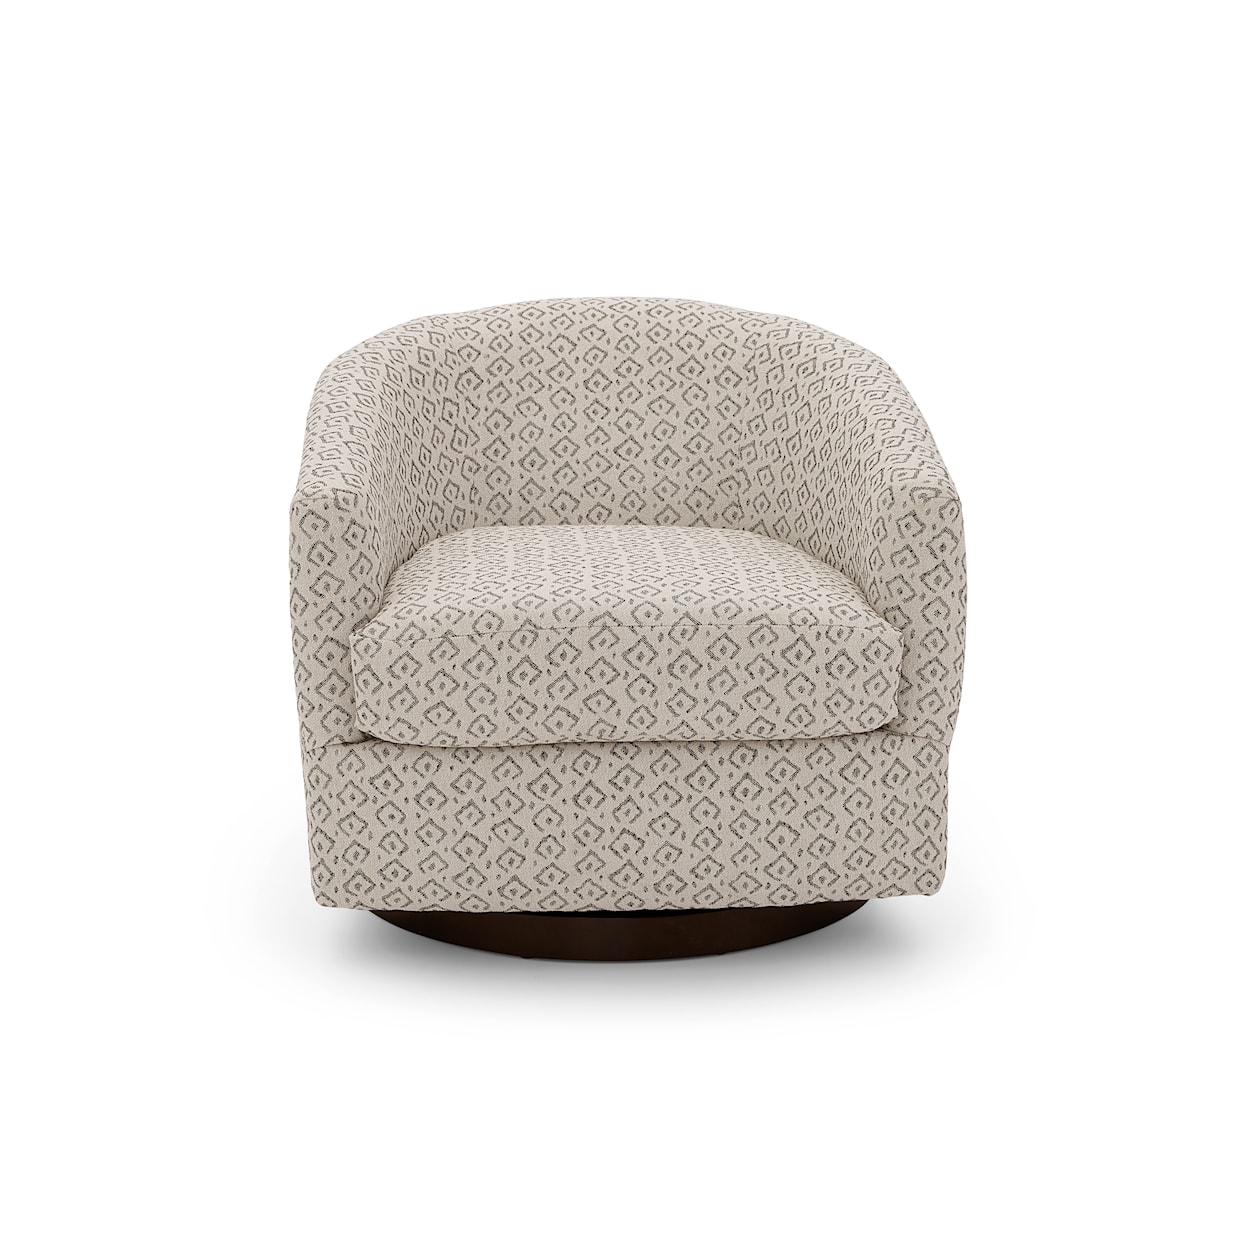 Best Home Furnishings Ennely Swivel Chair